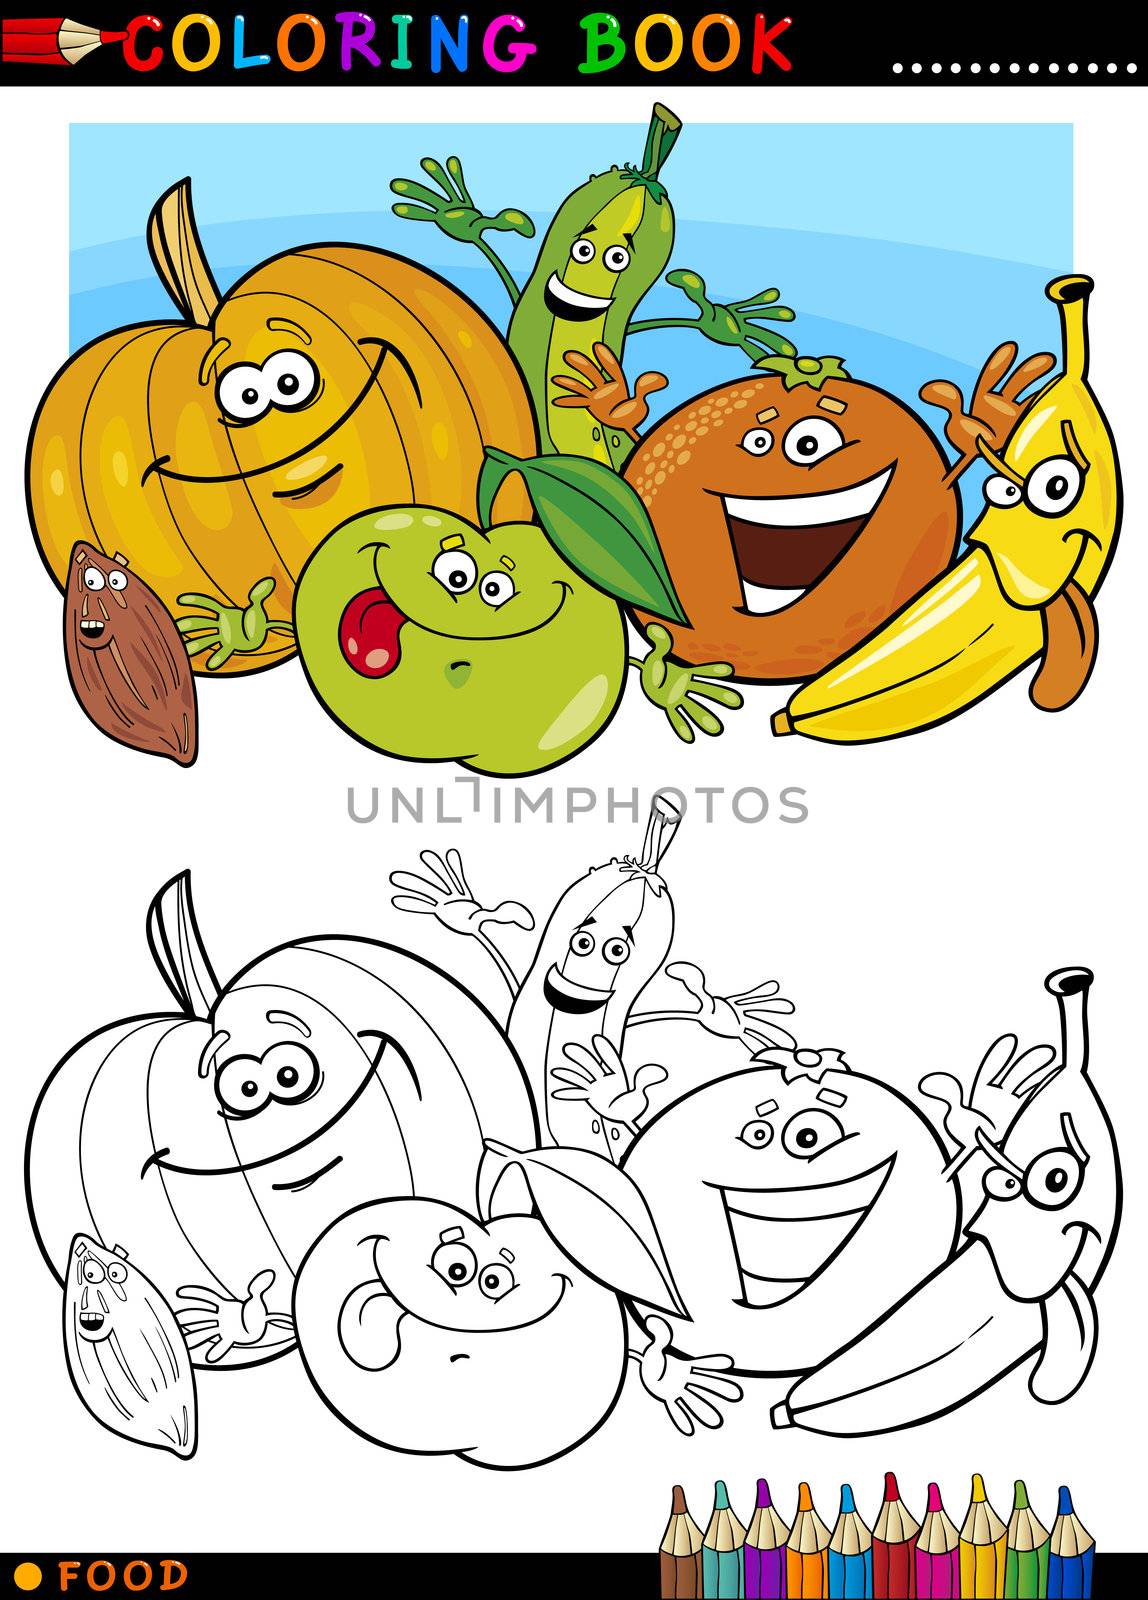 Coloring Book or Page Cartoon Illustration of Funny Food Characters Fruits and Vegetables for Children Education